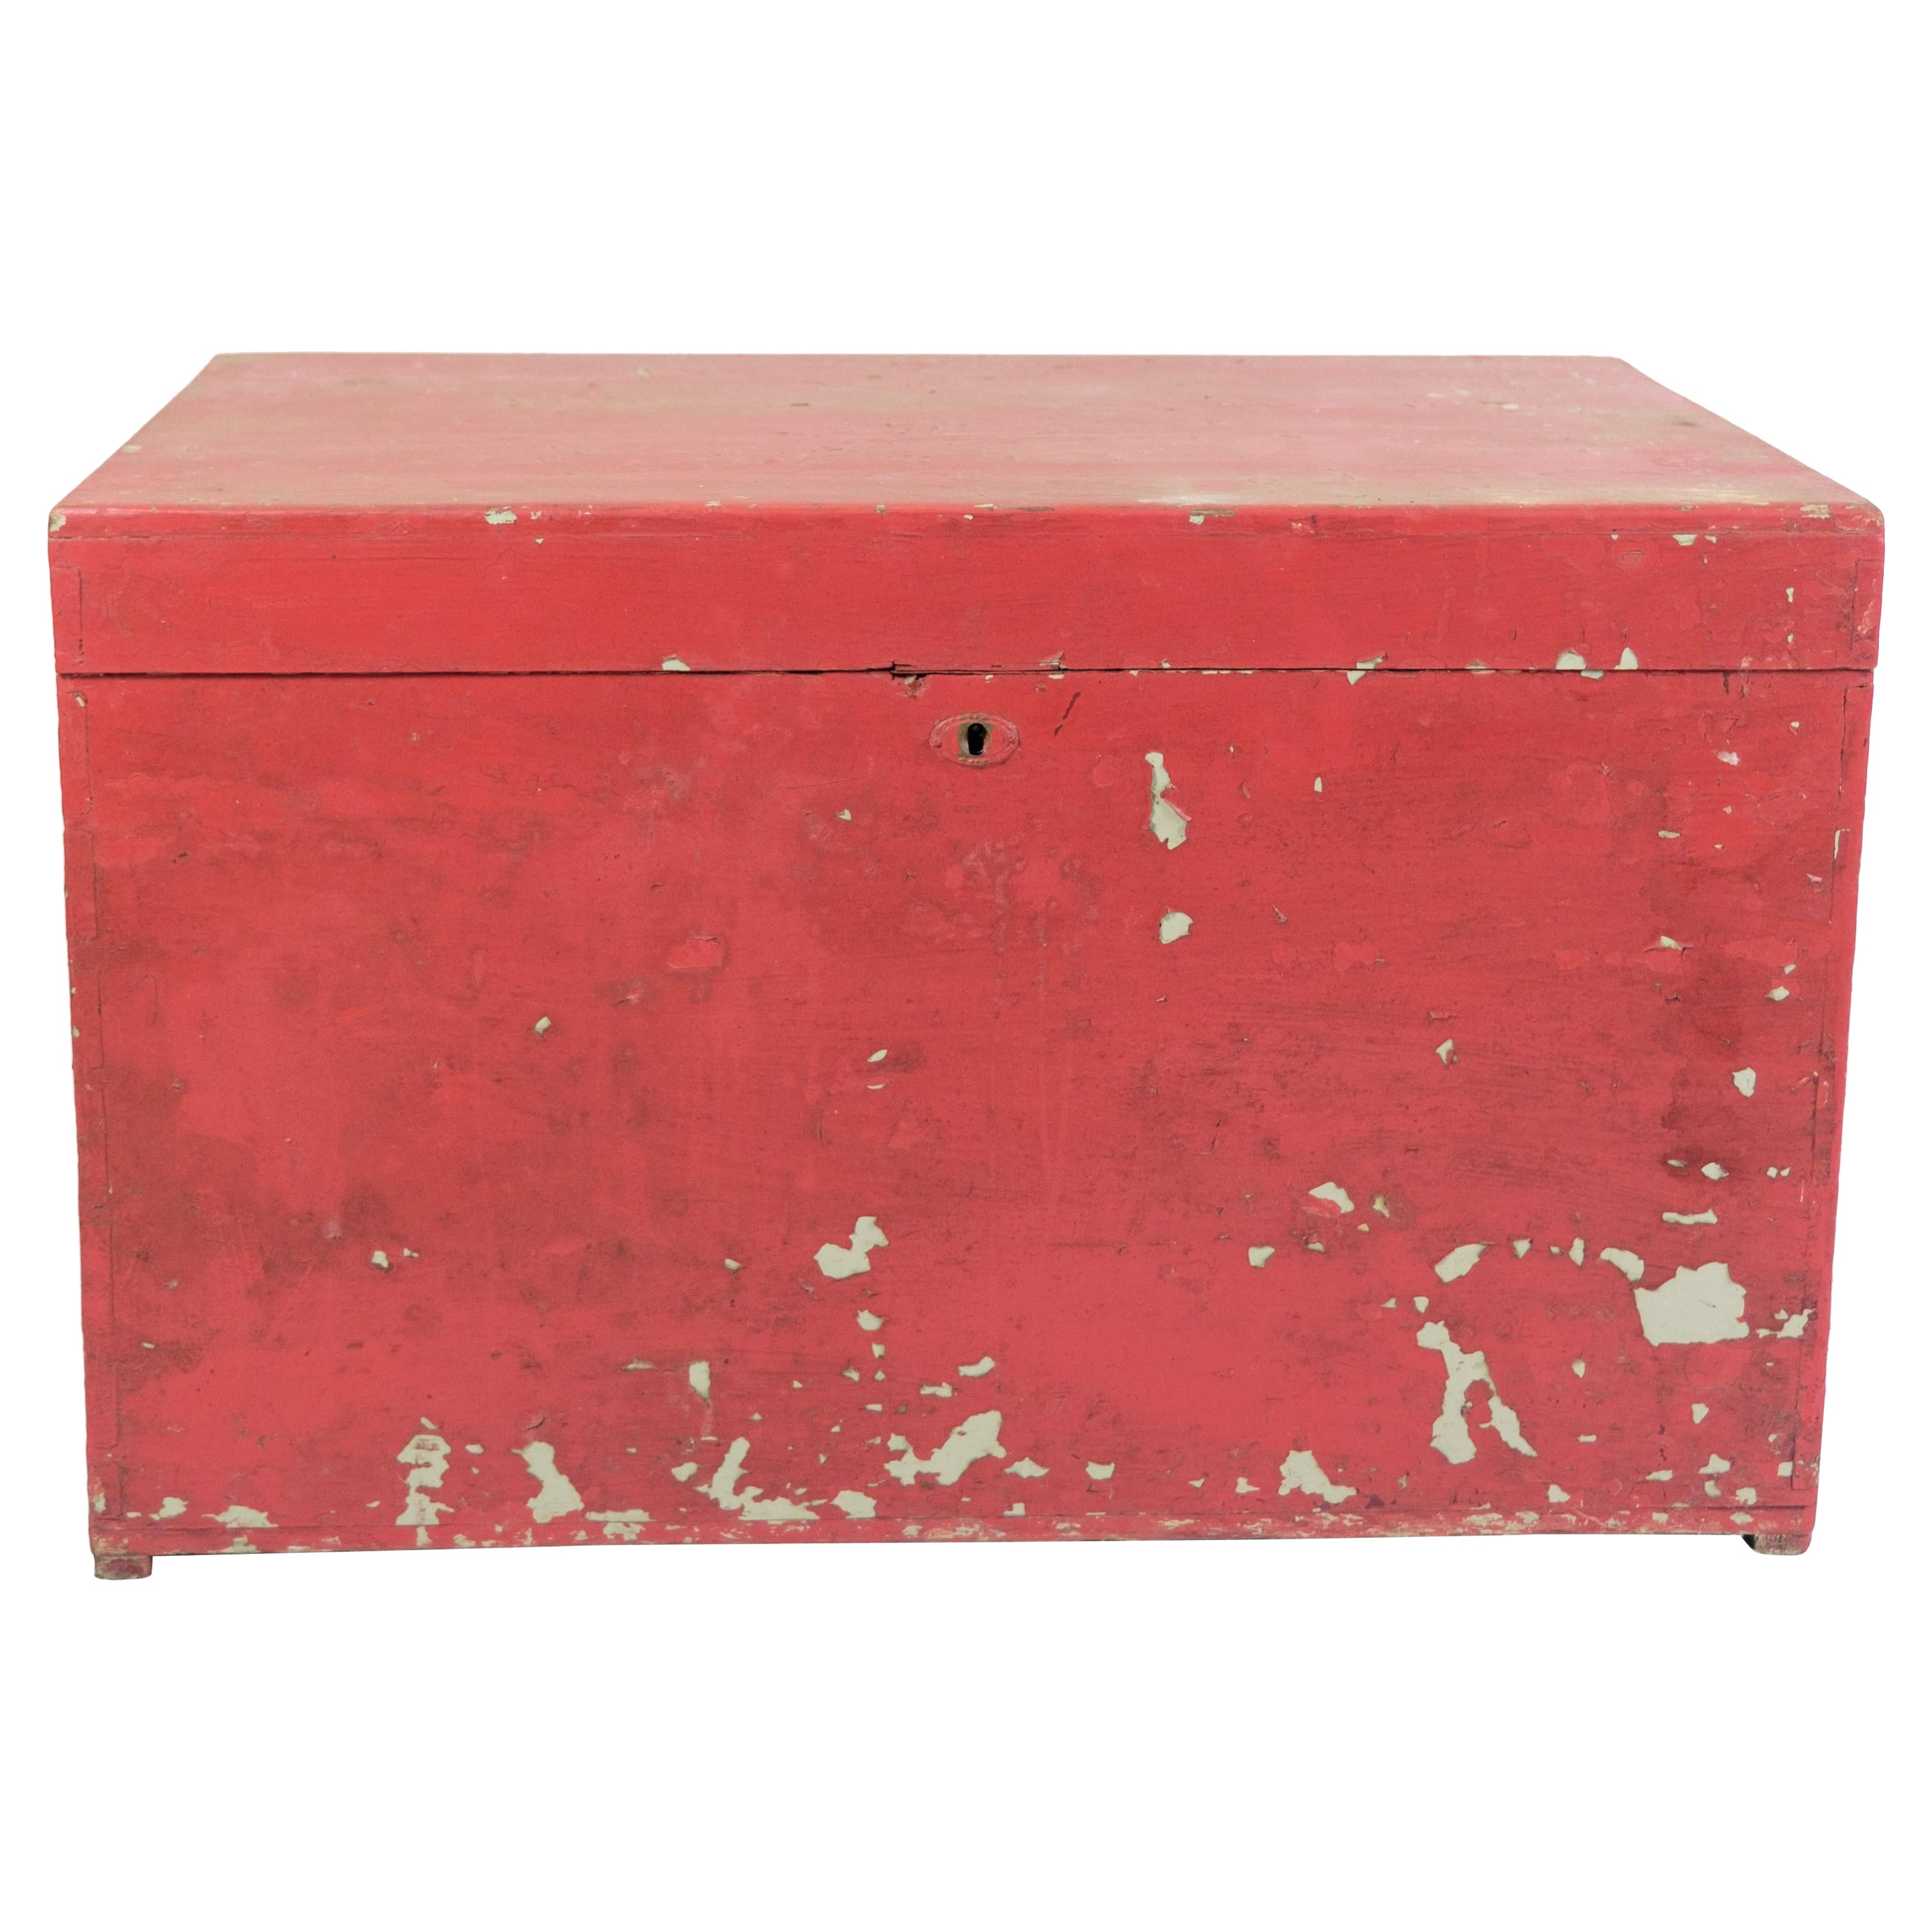 Antique Red Painted Chest From 1830s For Sale